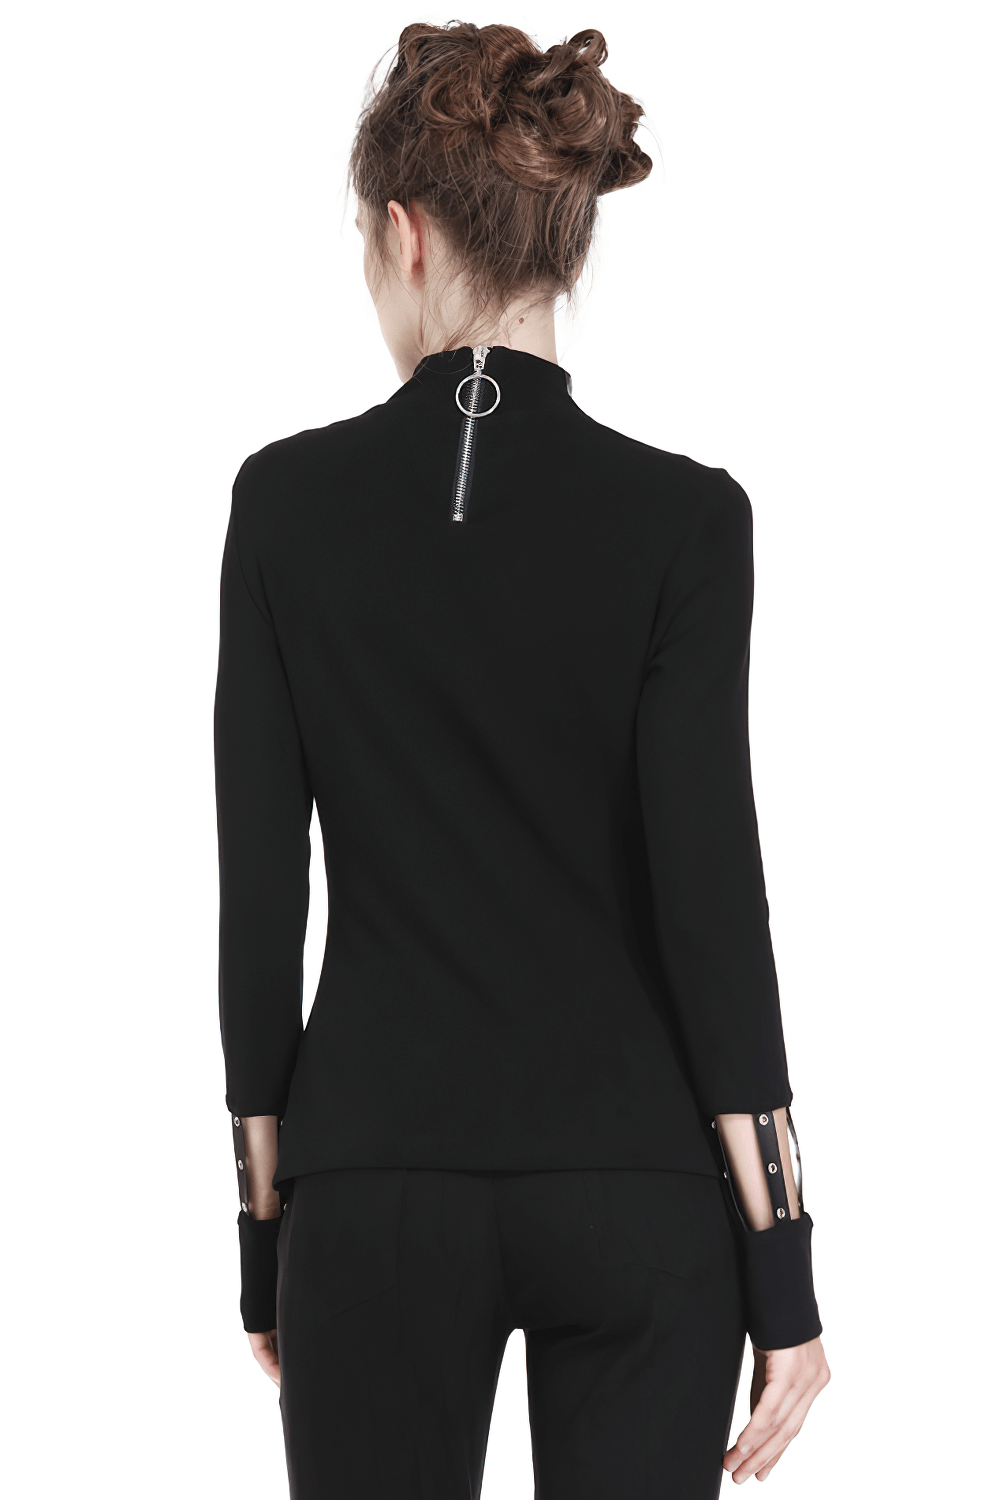 Punk Long Sleeves Top with Hollow-Out Collar Design